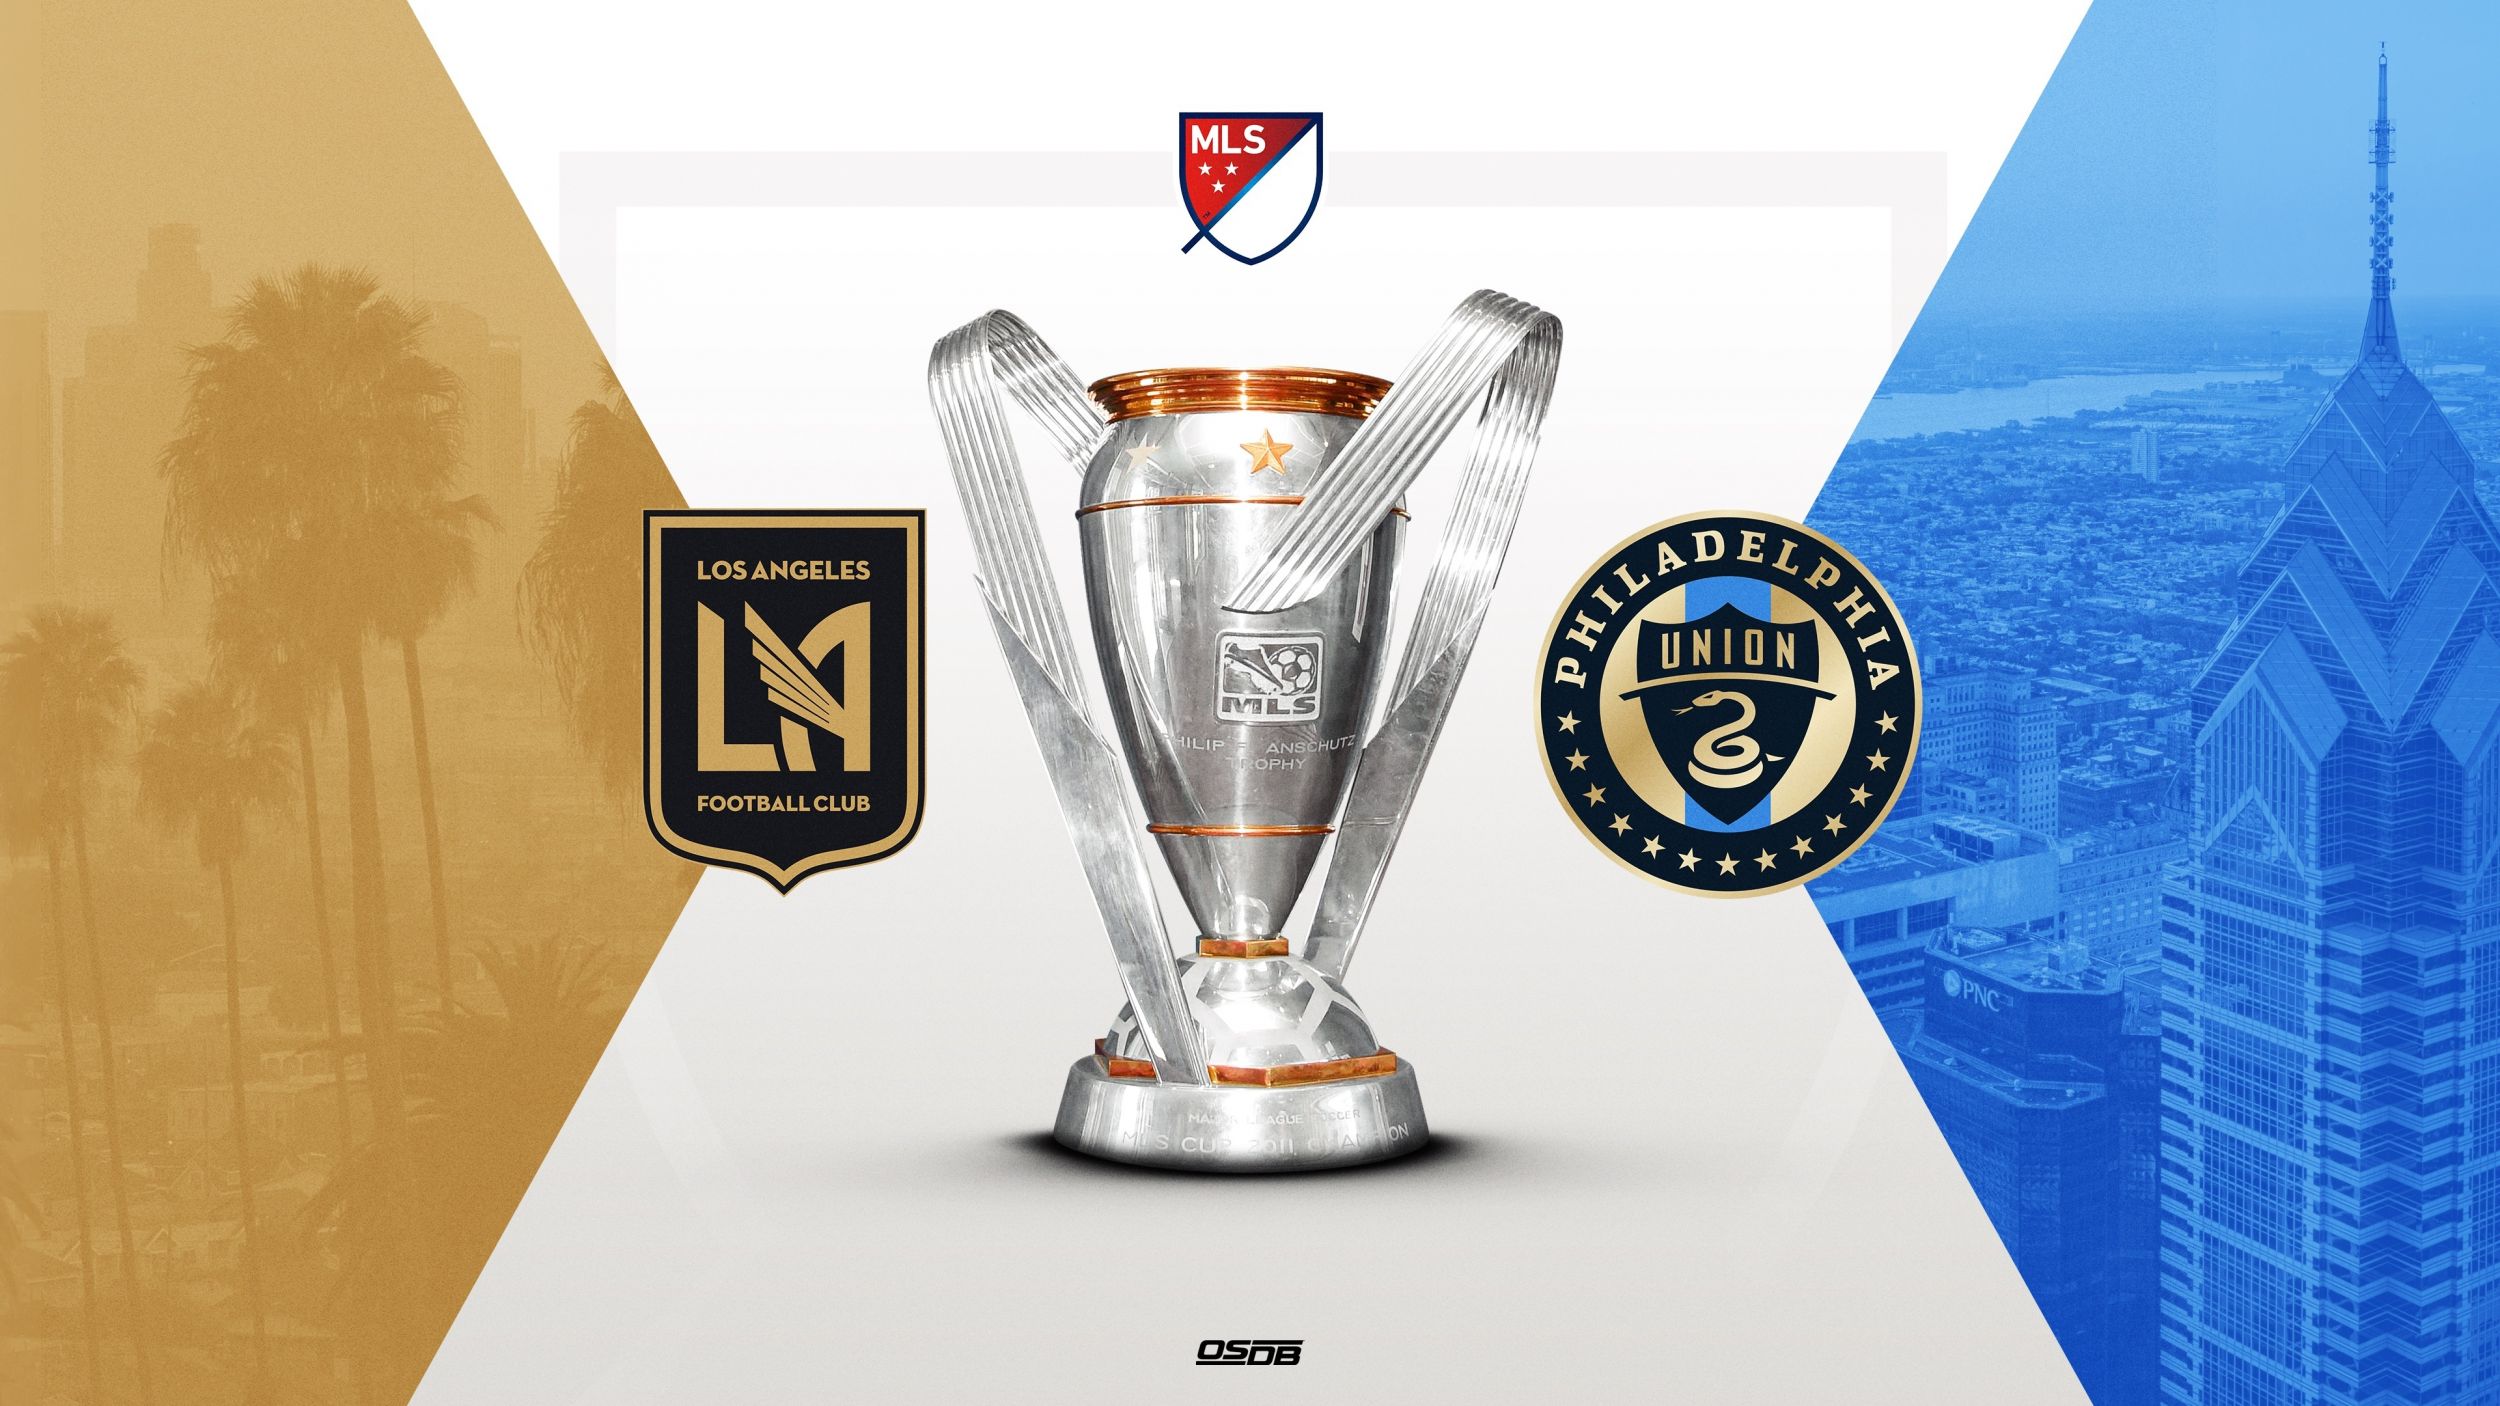 MLS CUP features East vs West